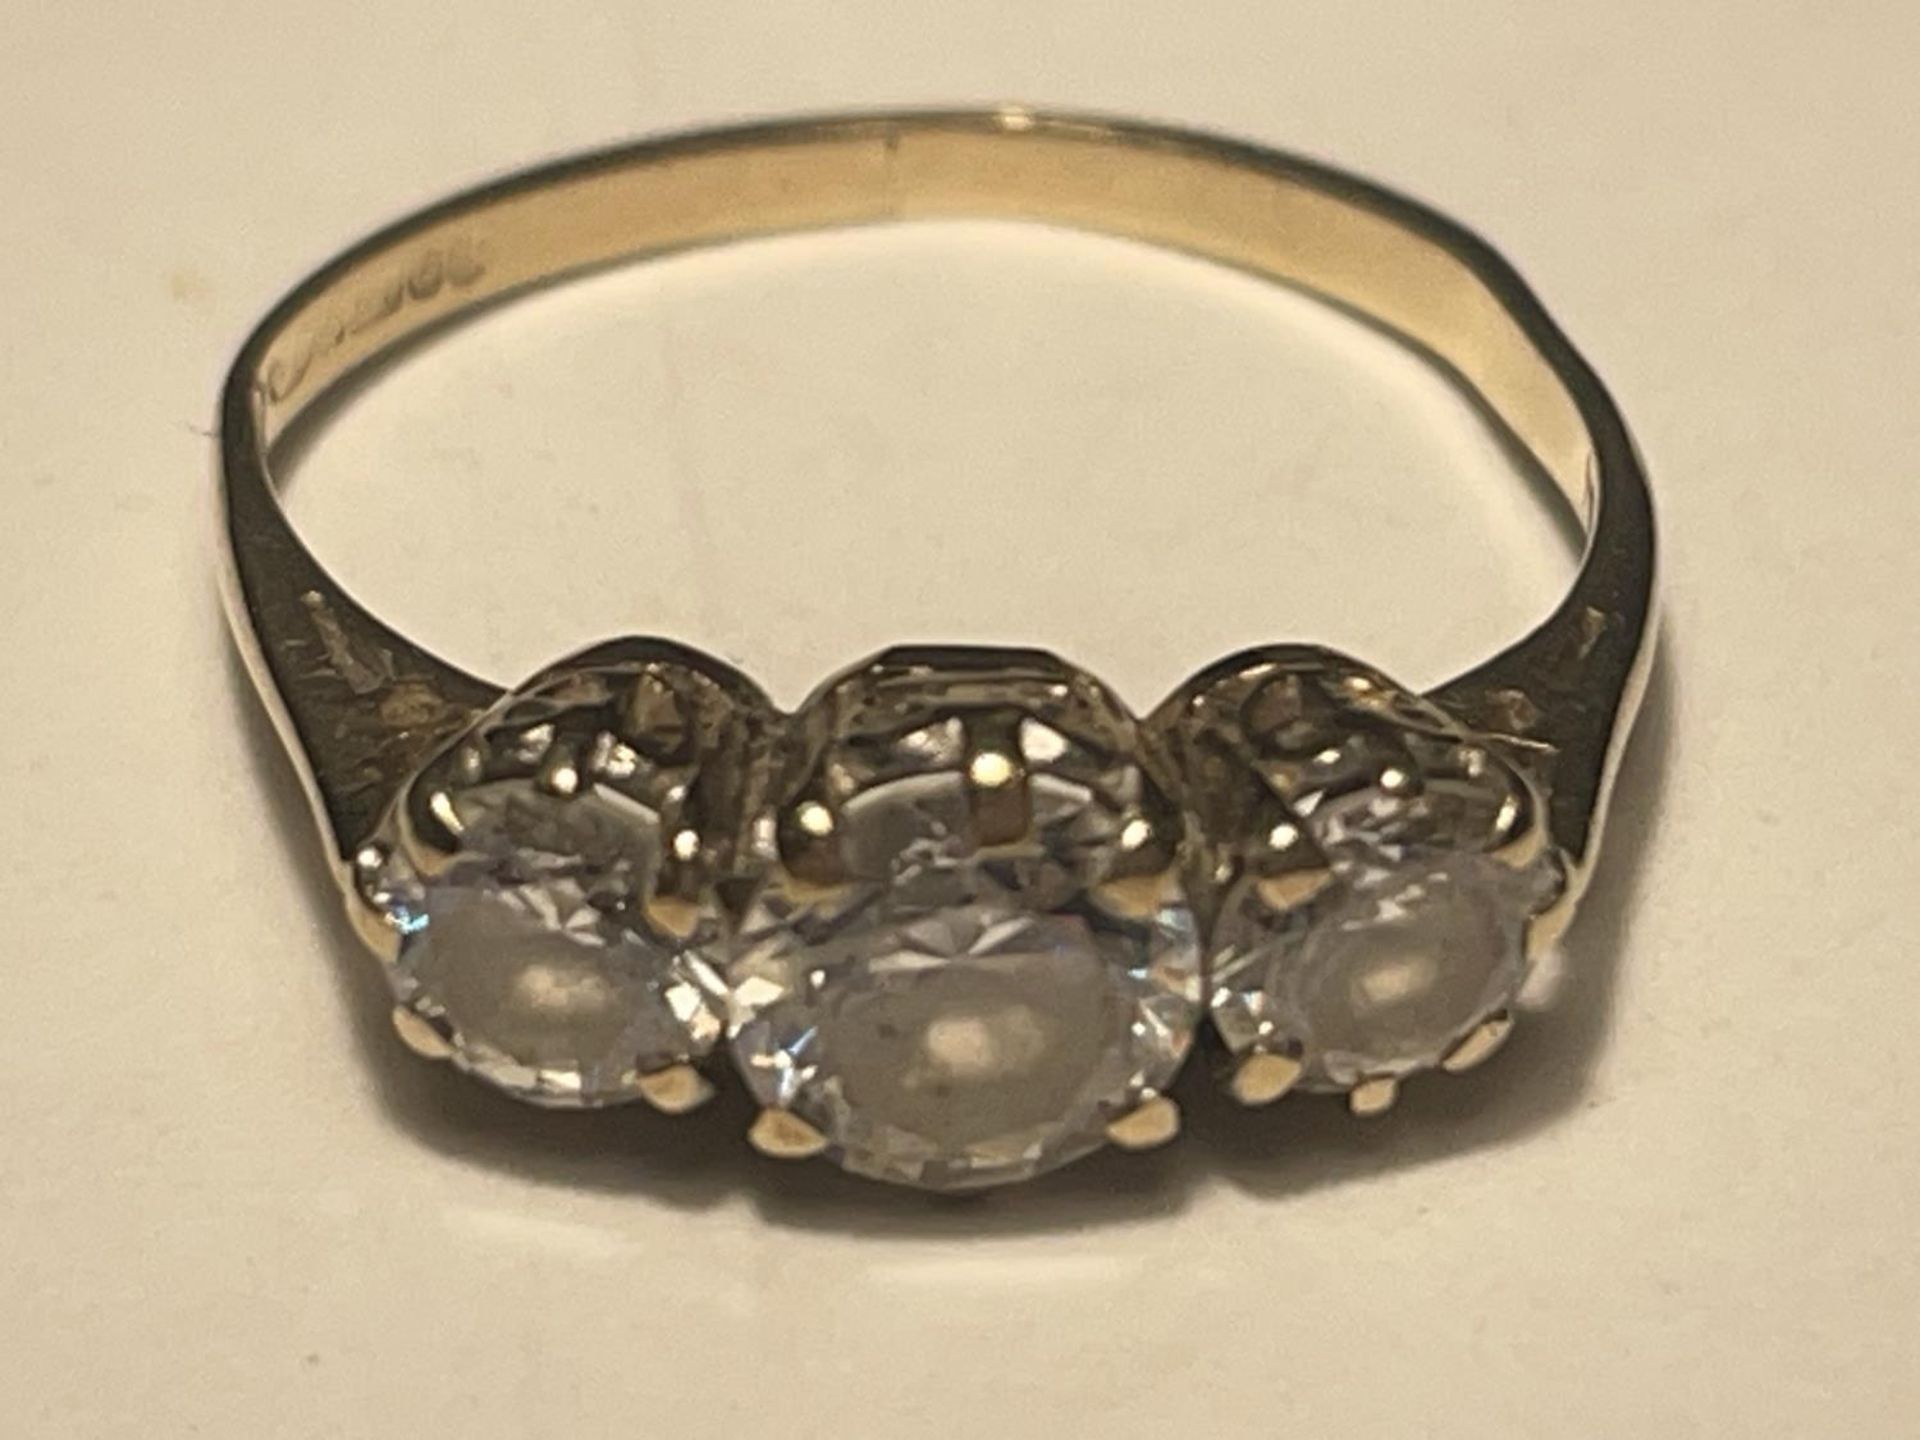 A 9 CARAT GOLD RING WITH THREE IN LINE CUBIC ZIRCONIAS